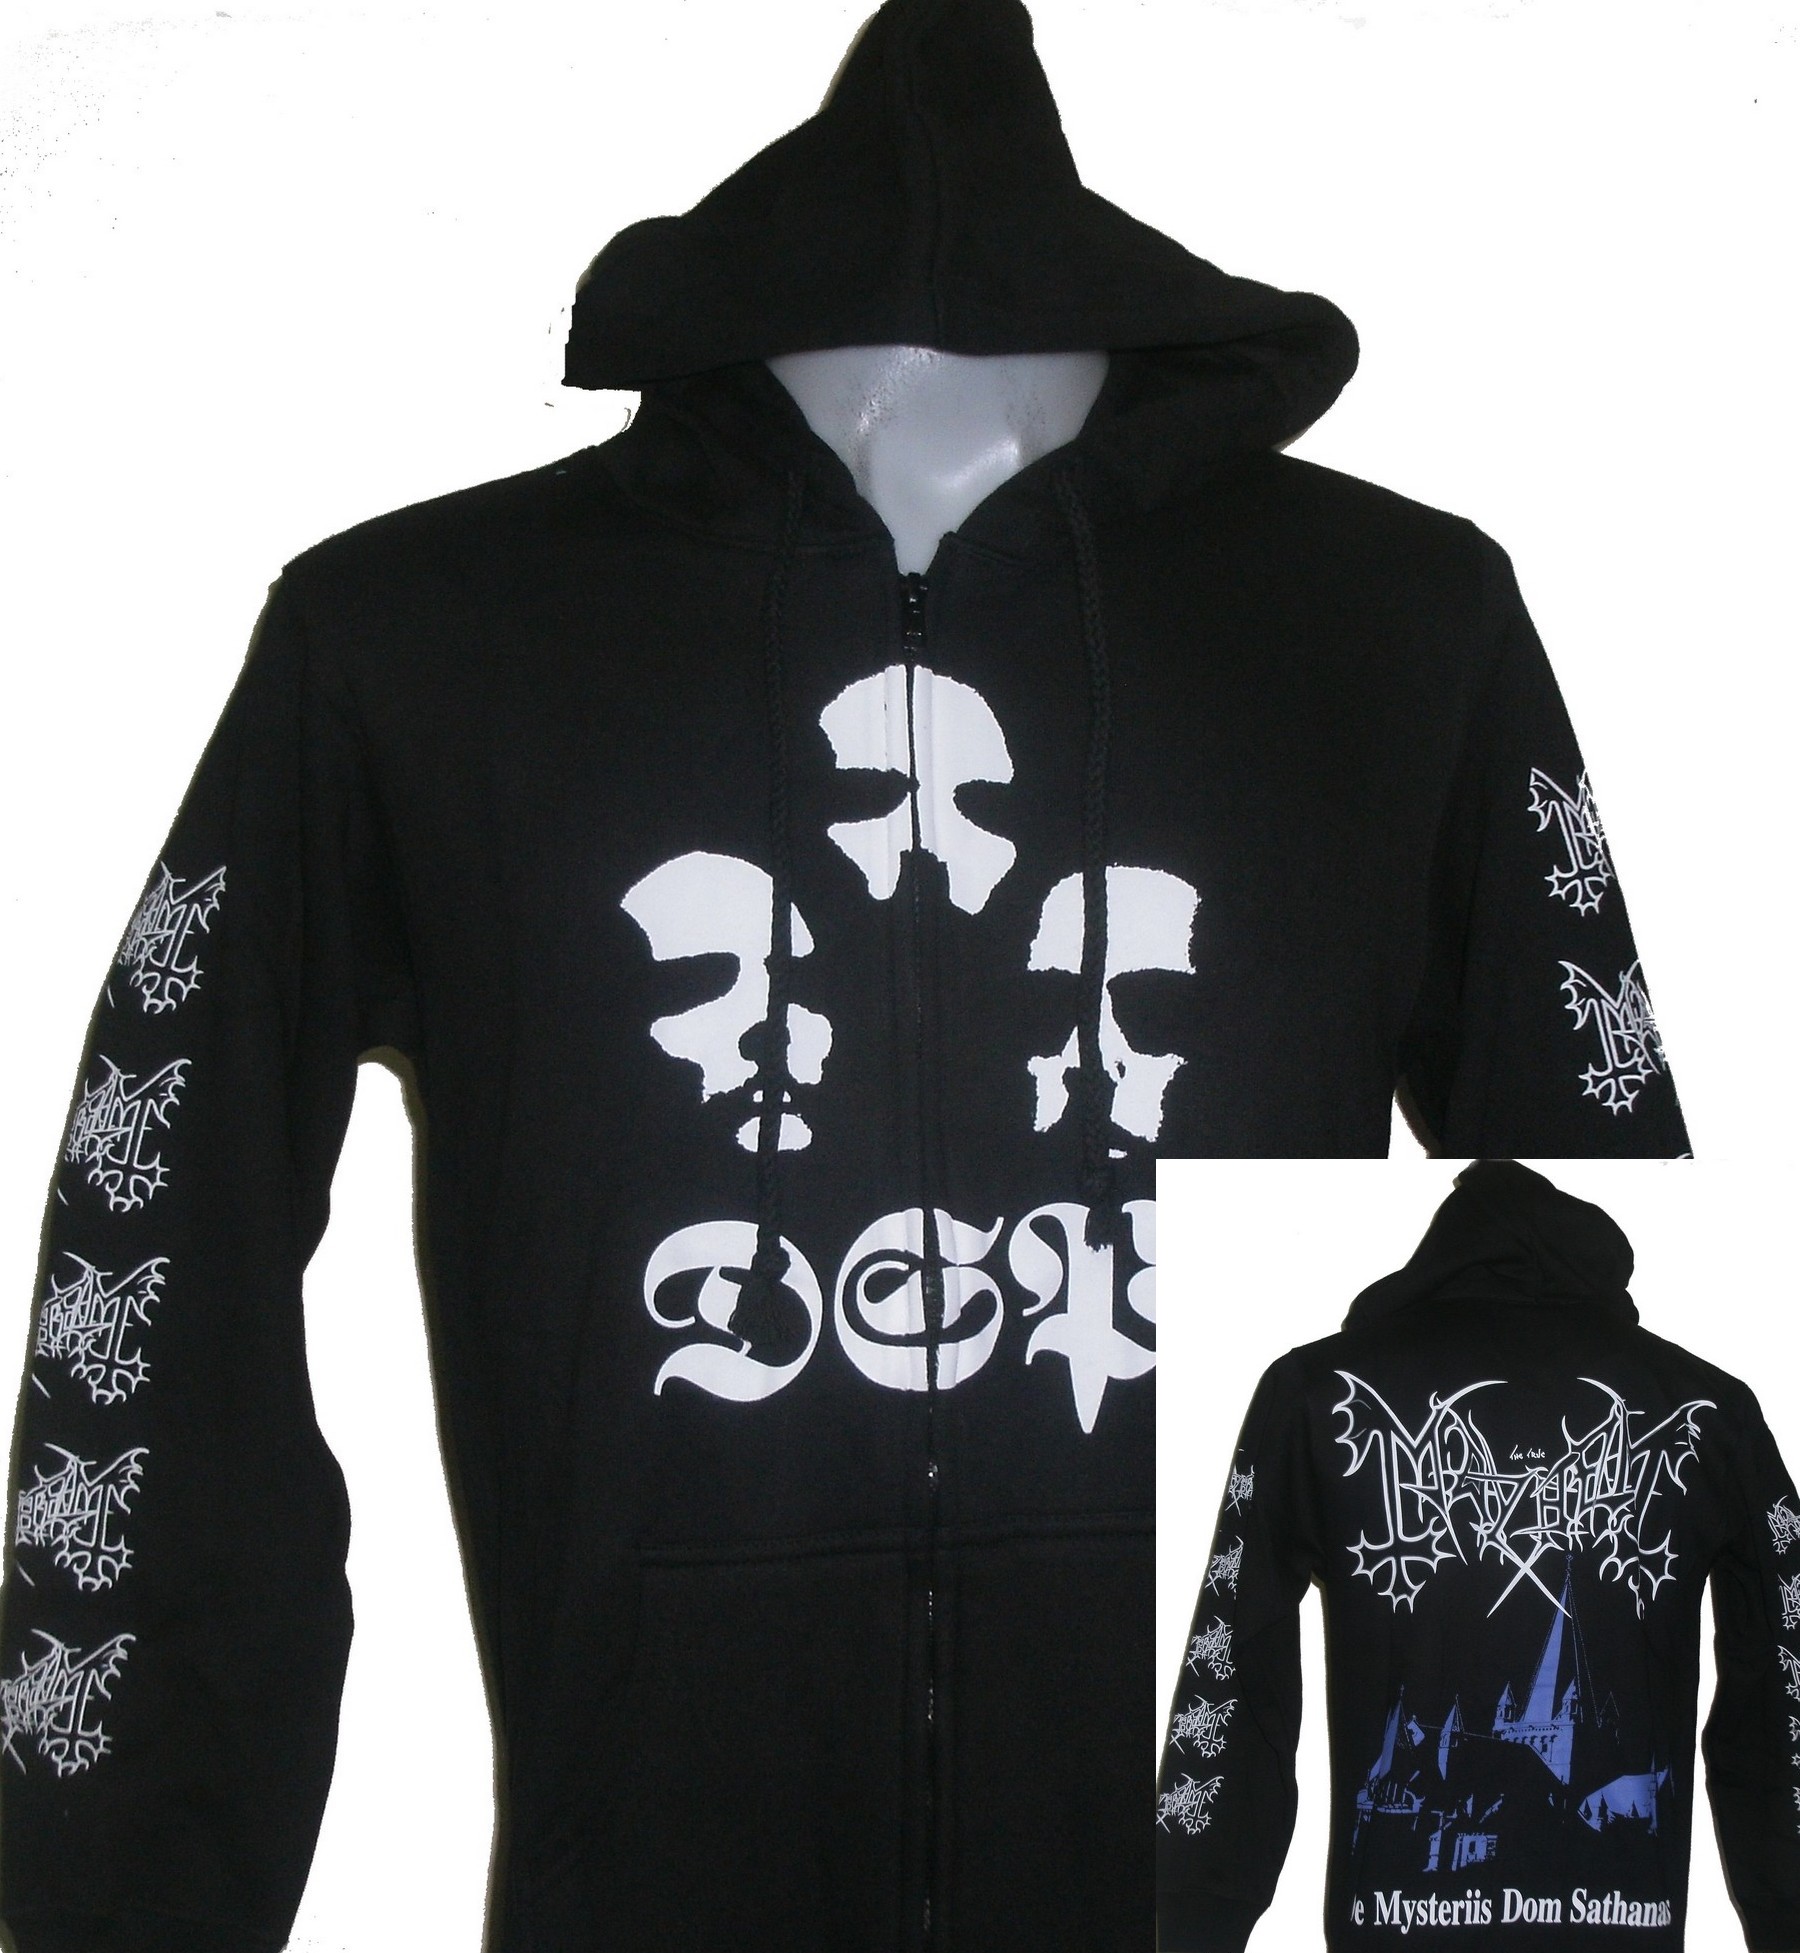 Details about   Mayhem 'De Mysteriis Dom Sathanas' Zip Up Hoodie NEW & OFFICIAL! 